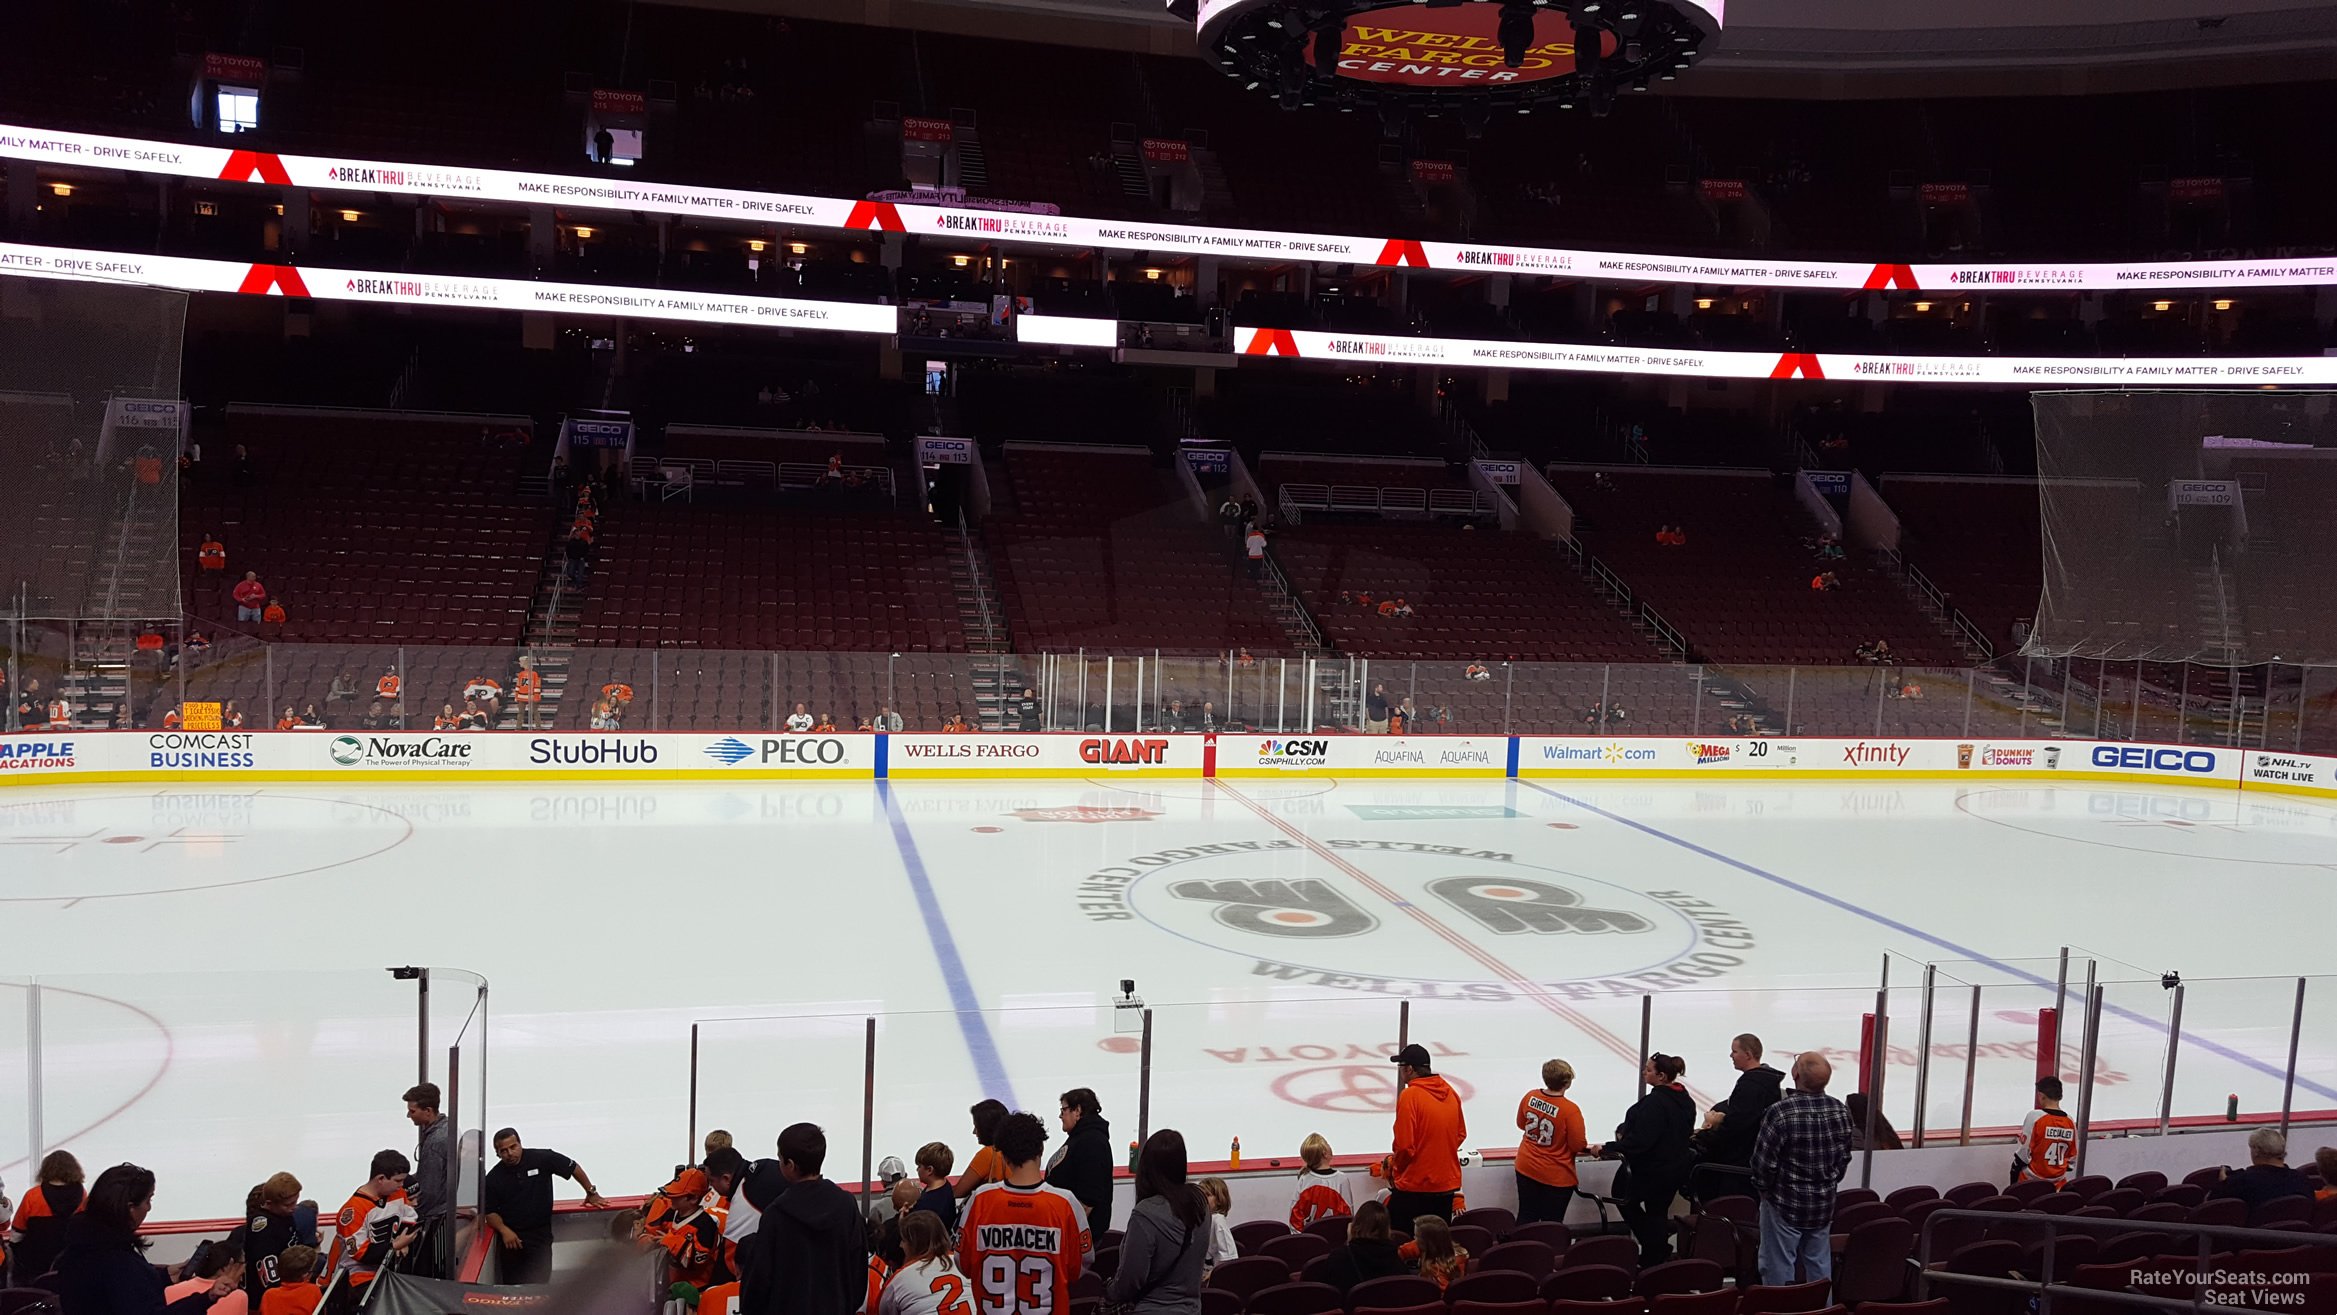 section 124, row 17 seat view  for hockey - wells fargo center